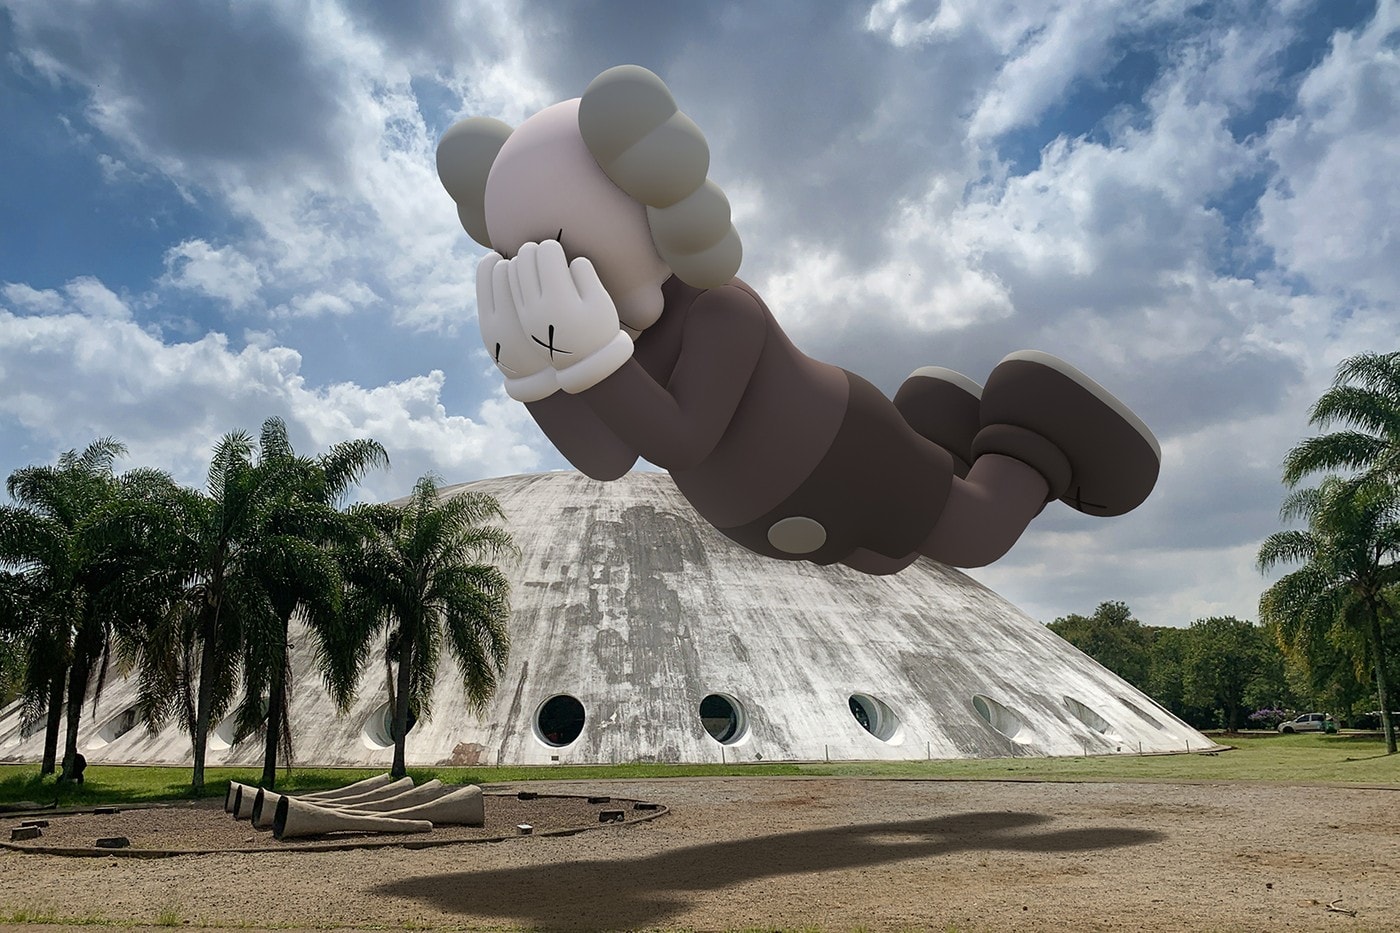 kaws companion sculpture acute art app collaboration expanded holiday augmented reality exhibition Brian donnelly